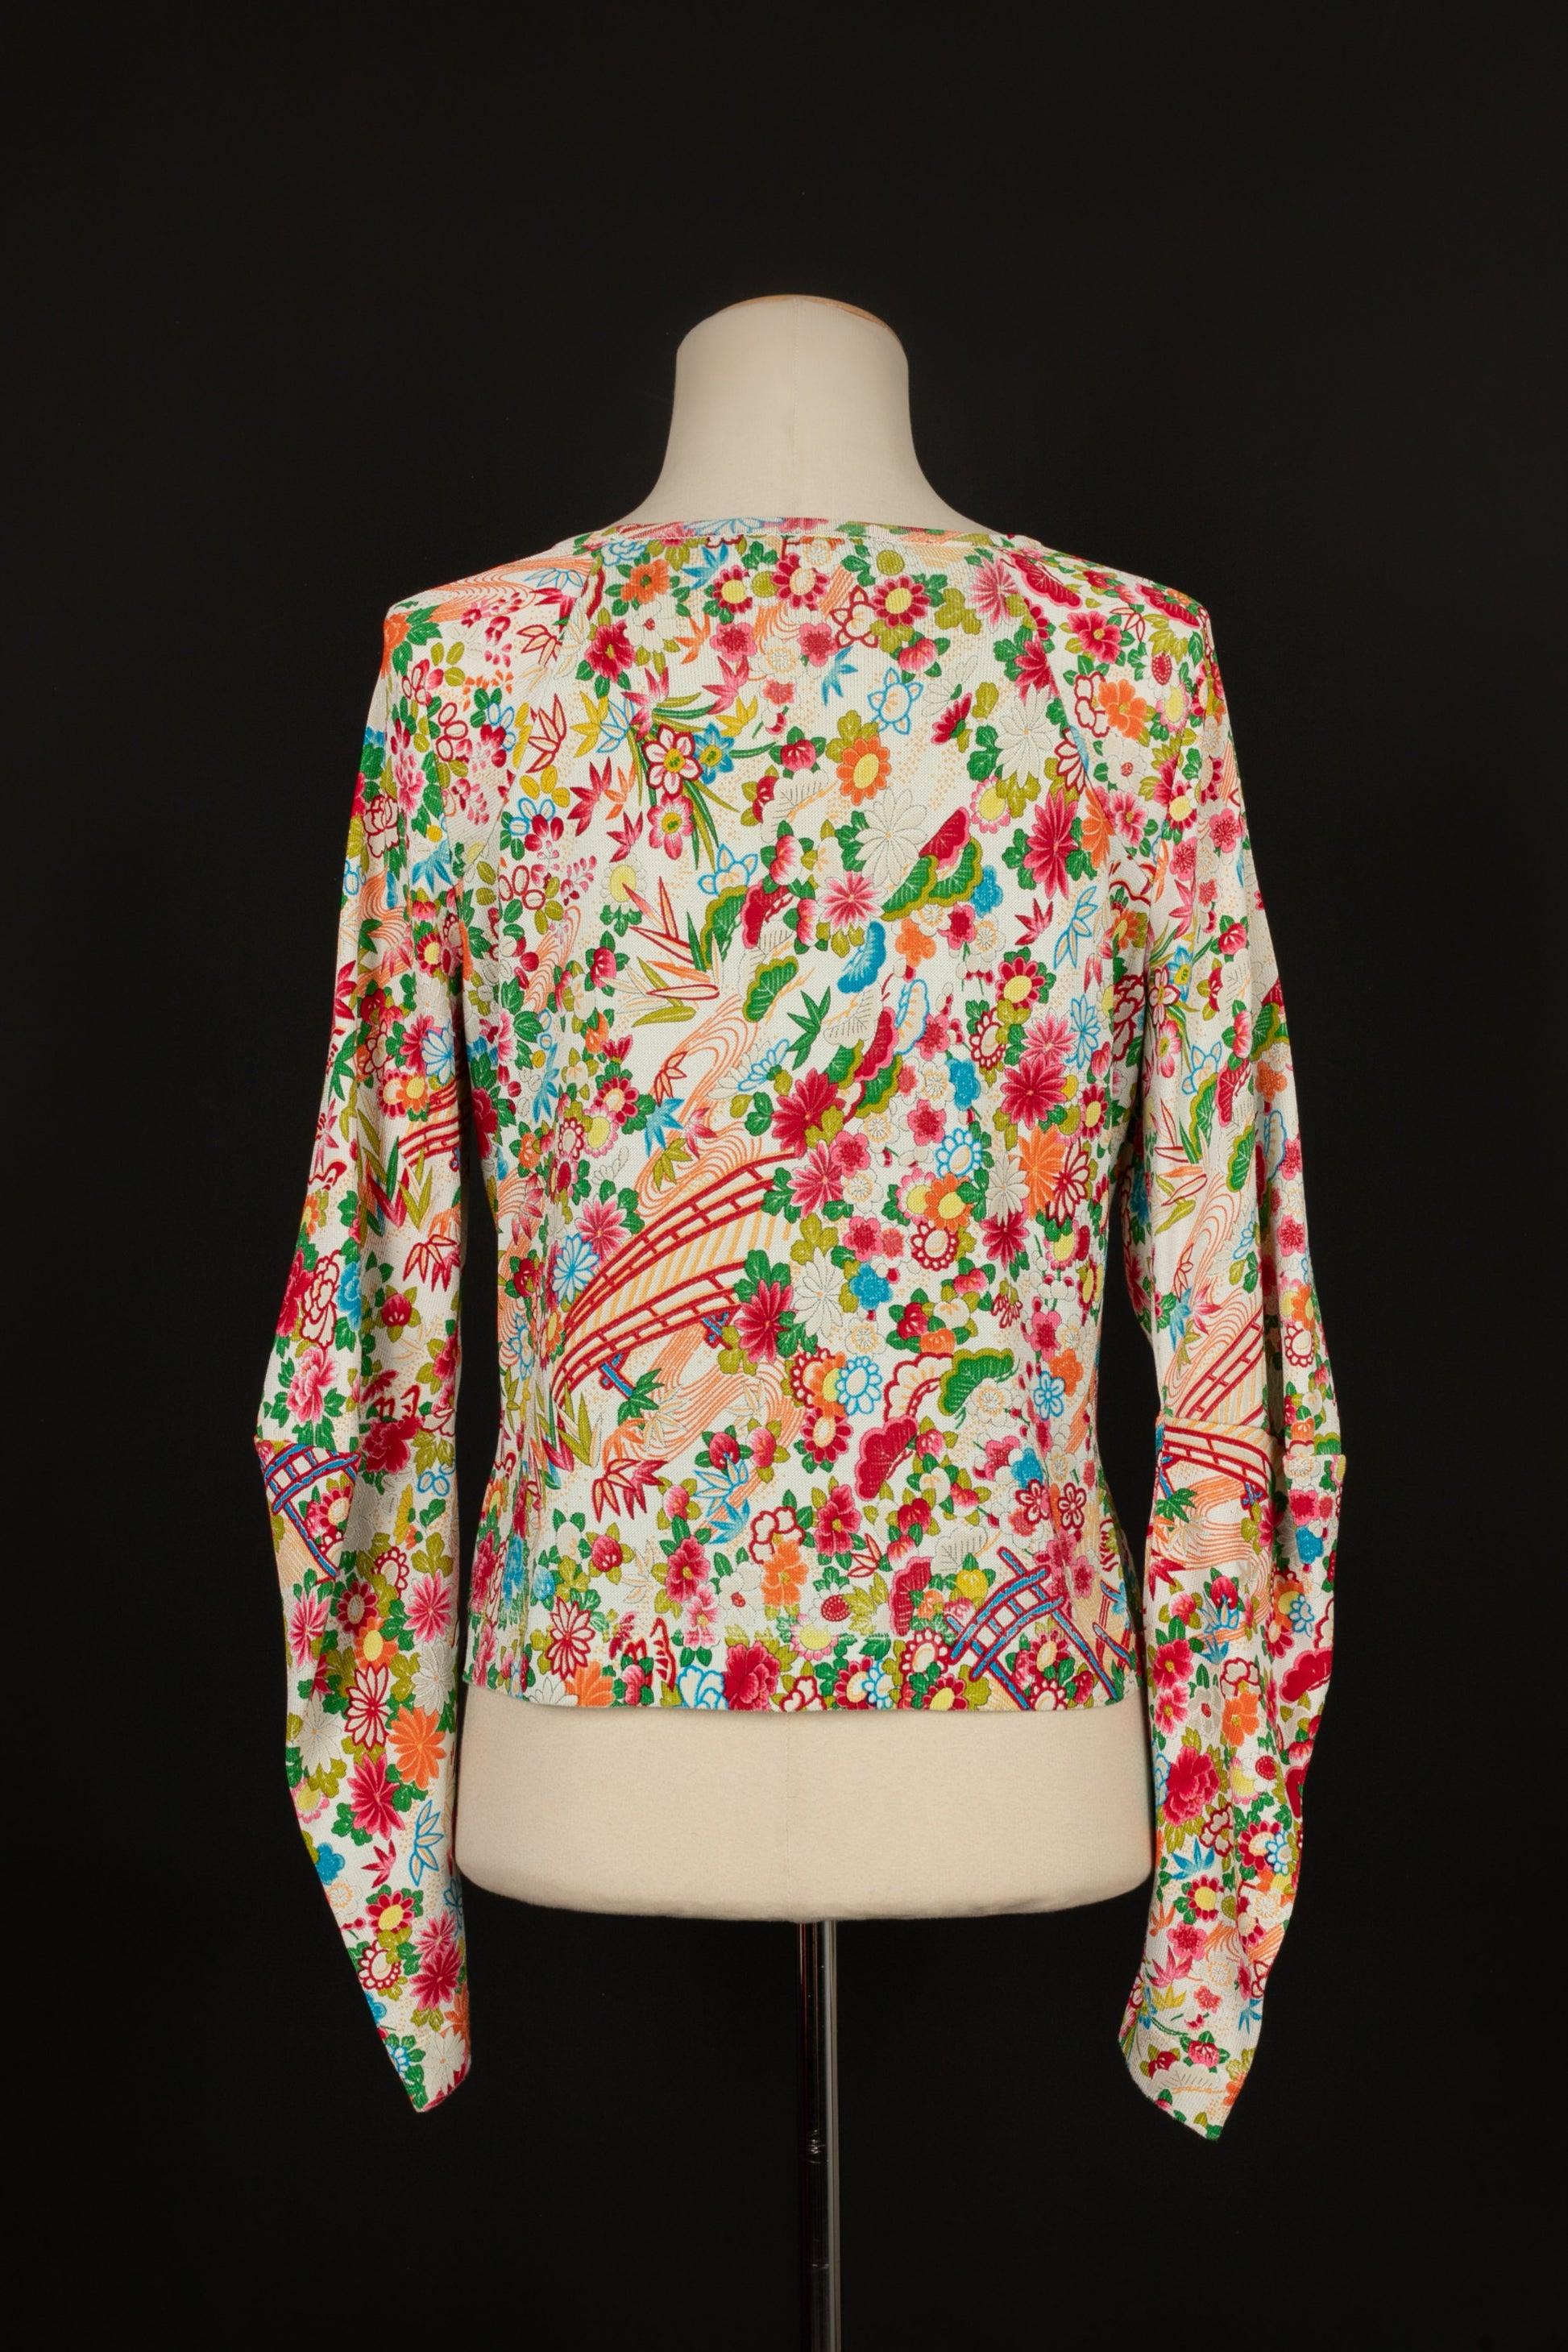 Christian Dior Long-sleeved Top with Multicolored Flower Patterns In Excellent Condition For Sale In SAINT-OUEN-SUR-SEINE, FR